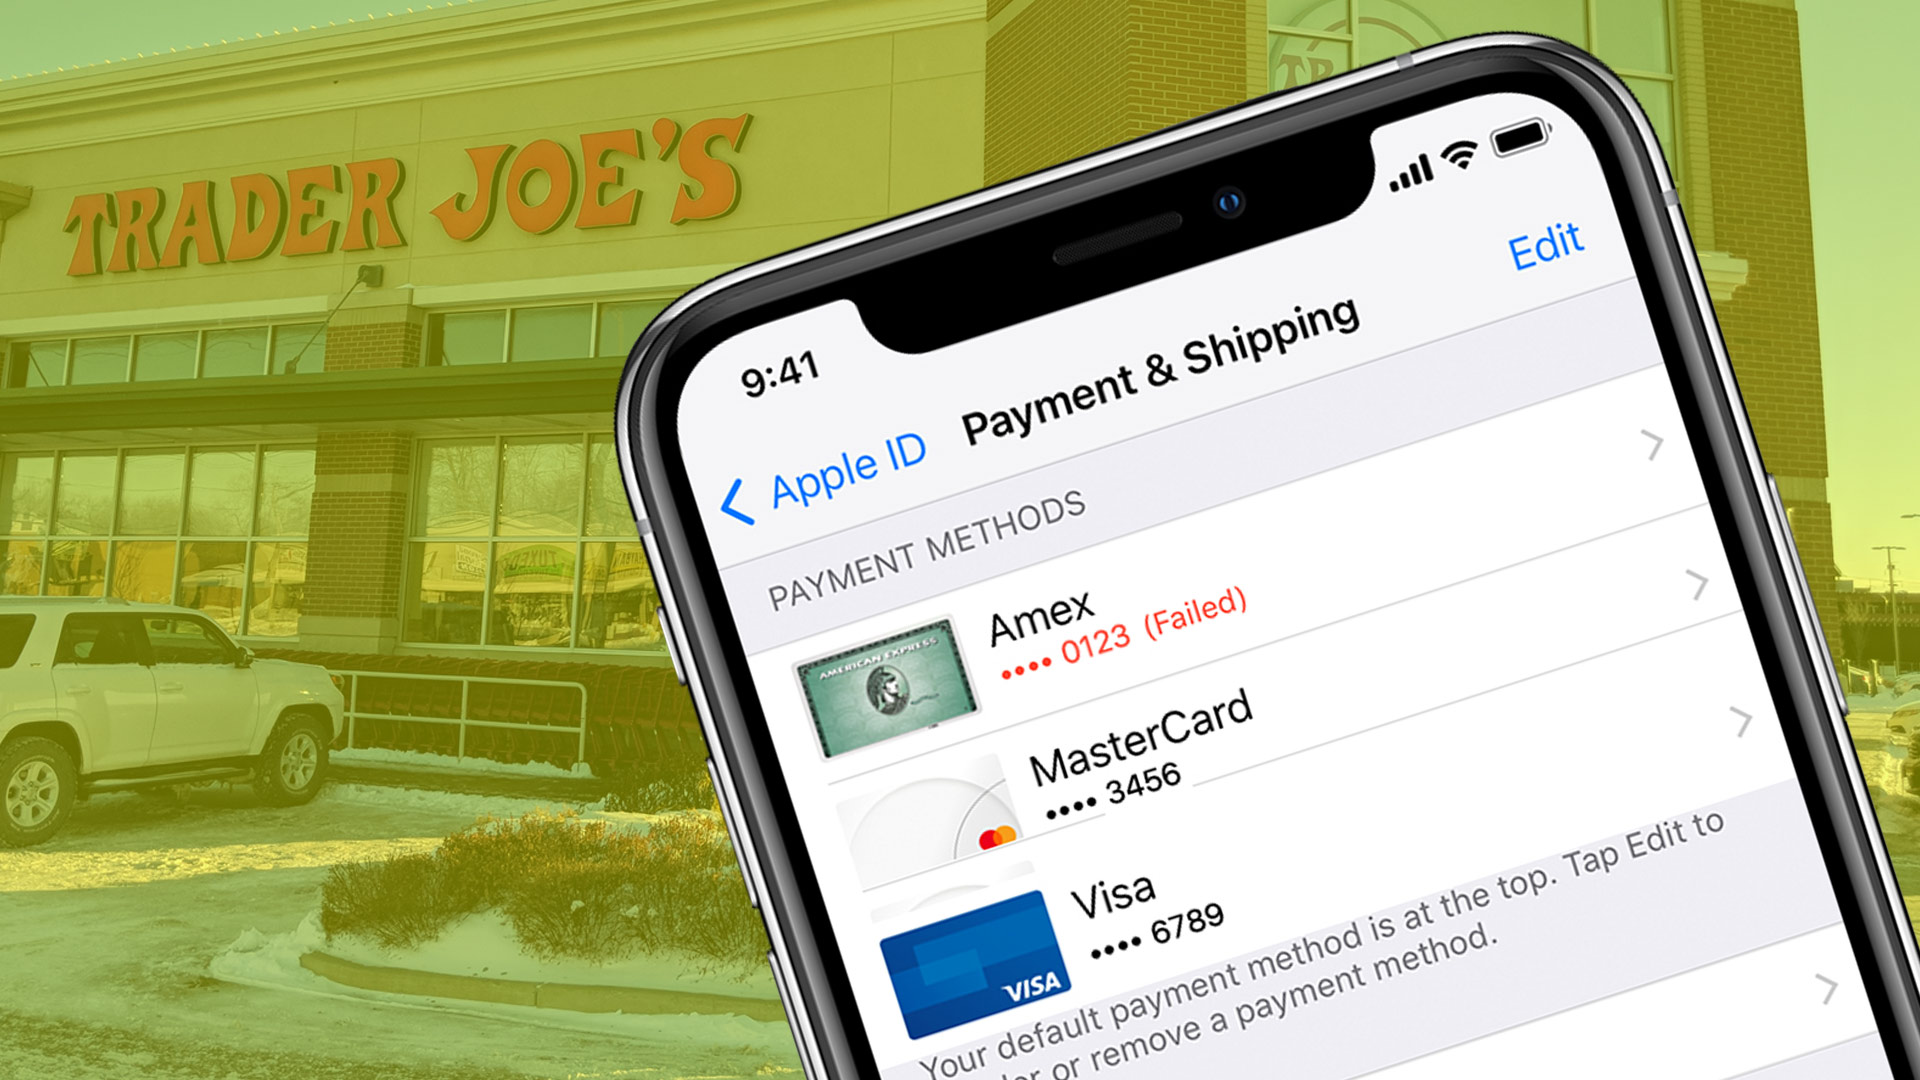 Does Trader Joes accept apple pay?